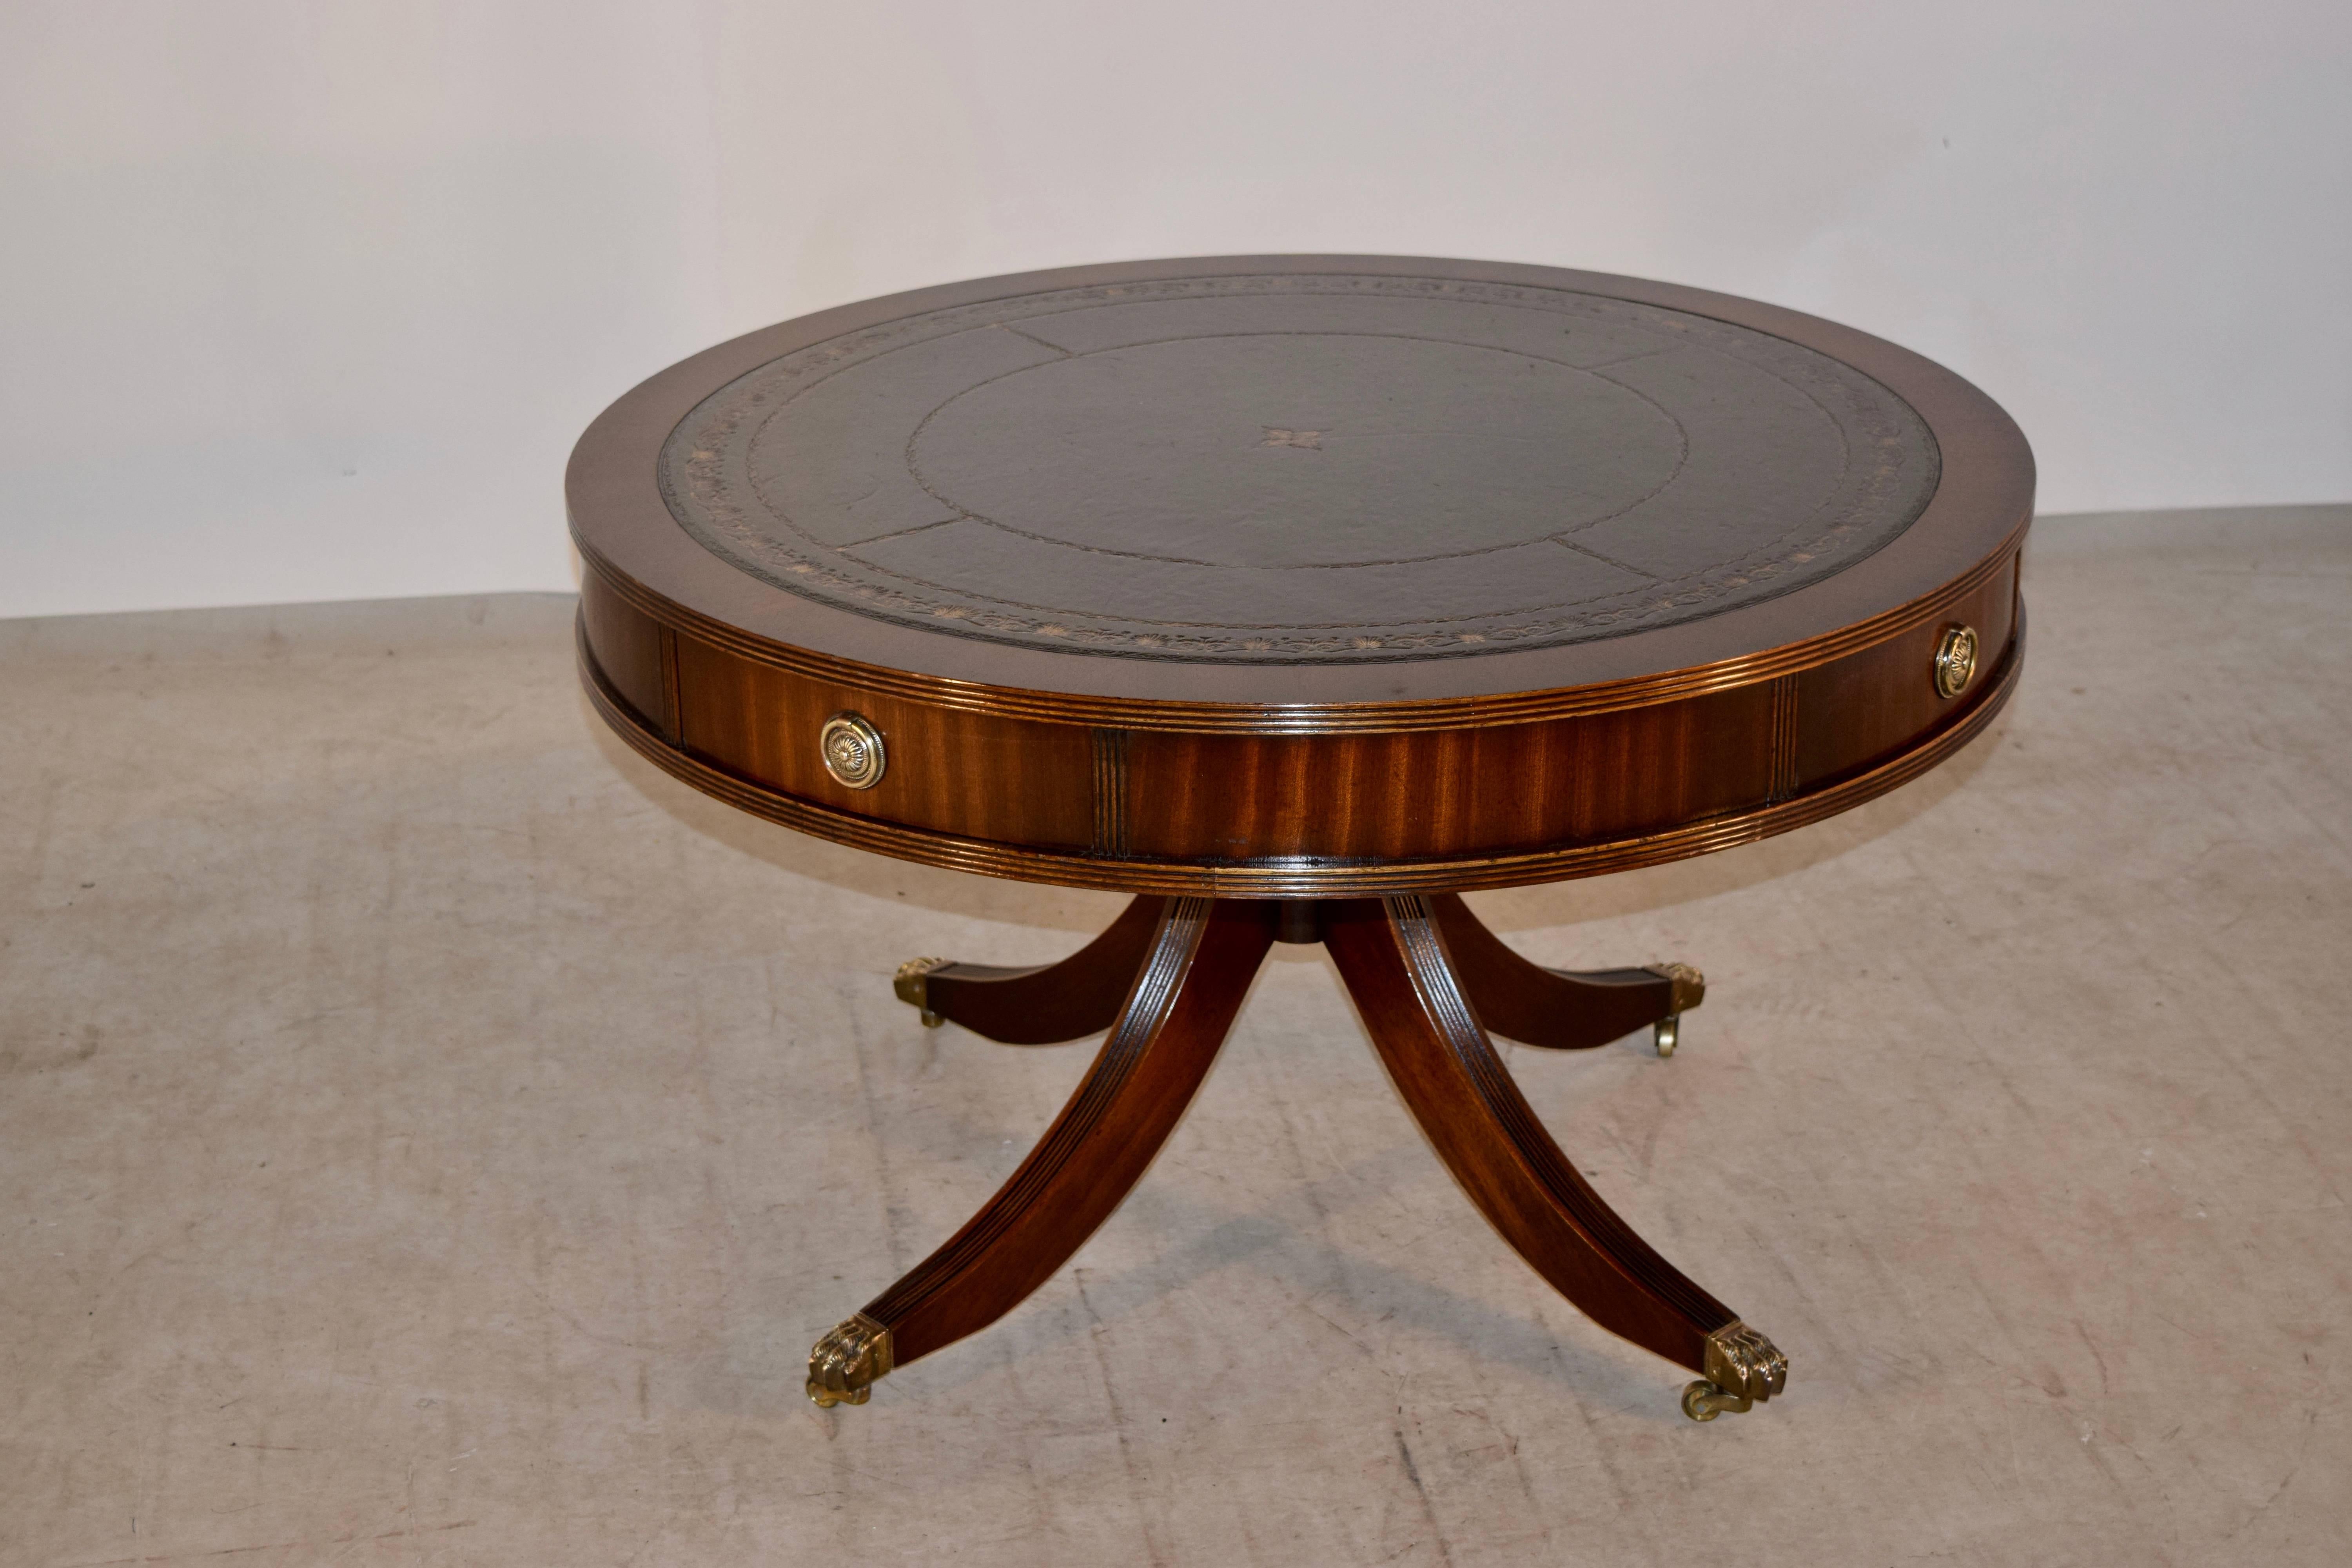 Mahogany coffee table from England, circa 1950. The top is banded in mahogany and has a central panel of hand tooled leather in dark green. The top has a reeded edge on the top and bottom and has drawers which open to reveal storage. This drum style